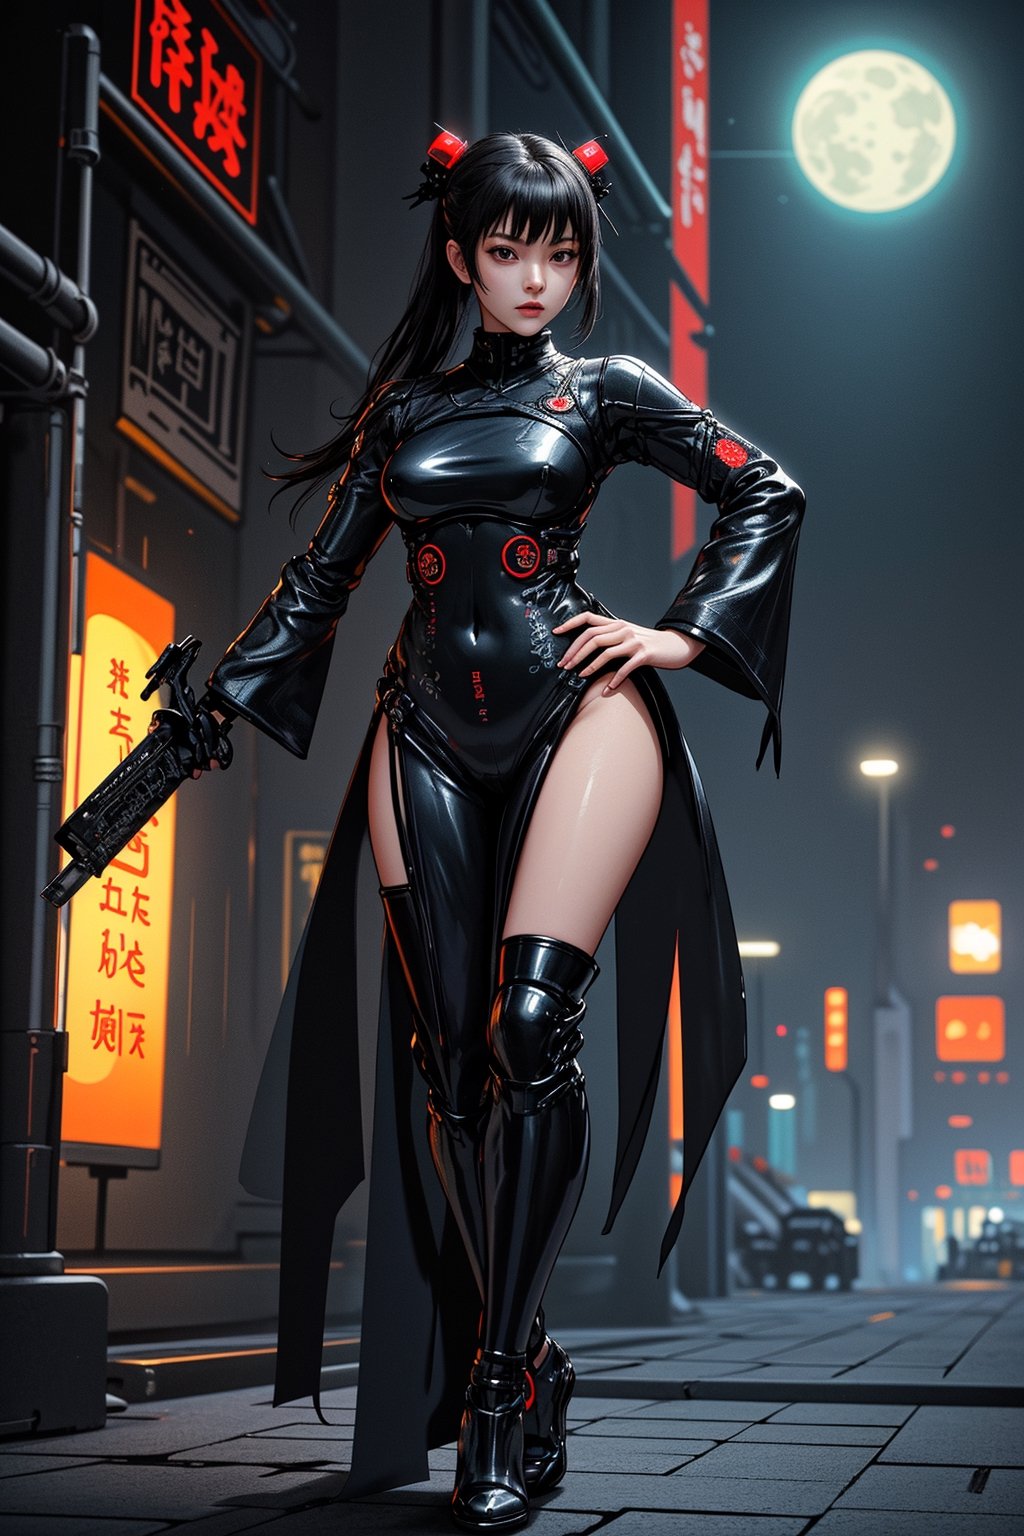 masterpiece, best quality, high resolution,  female_solo , ((1 sexy beautiful young kunoichi, clothing in revealing black traditional ninja onepiece outfit textured in silk+fabric)), holding 1 short katana in the right hand, 1 big moon in the dark night , ((full length body shot with sexy dynamic pose)), highly detailed background of old Japanese culture achitechture +cyberpunk buildings with neon lights,ink,Cyberpunk,xjrex,C7b3rp0nkStyle,A Traditional Japanese Art,Styles Pose,perfect,ninjascroll,Traditional Media,Striking Pose,Mecha body,1 girl,cyber_asia ,